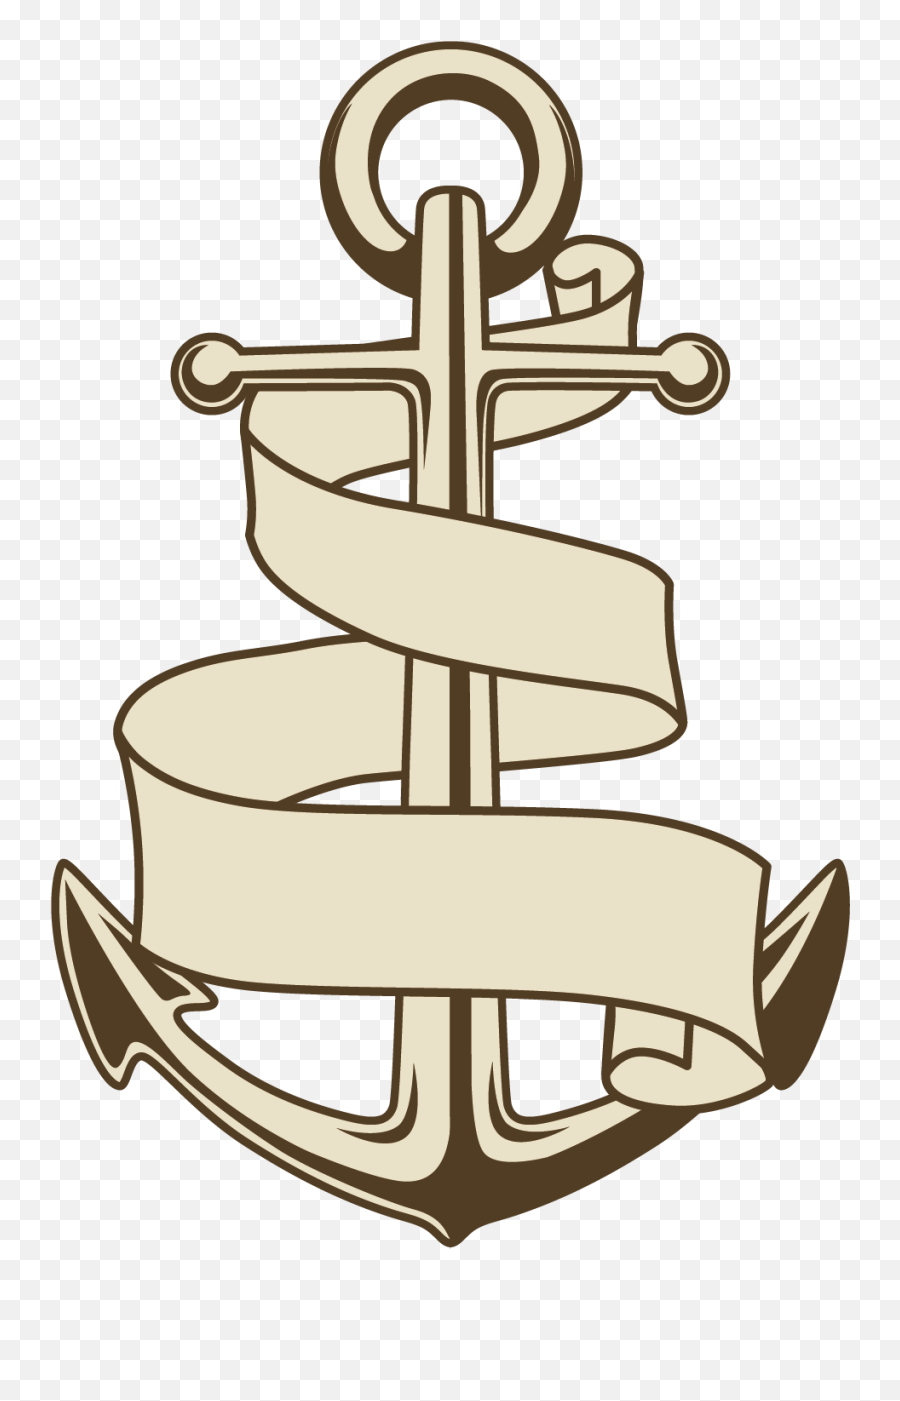 Anchor Download Transparent Png Image Arts - Anchor With Ribbon Clipart,Anchor Transparent